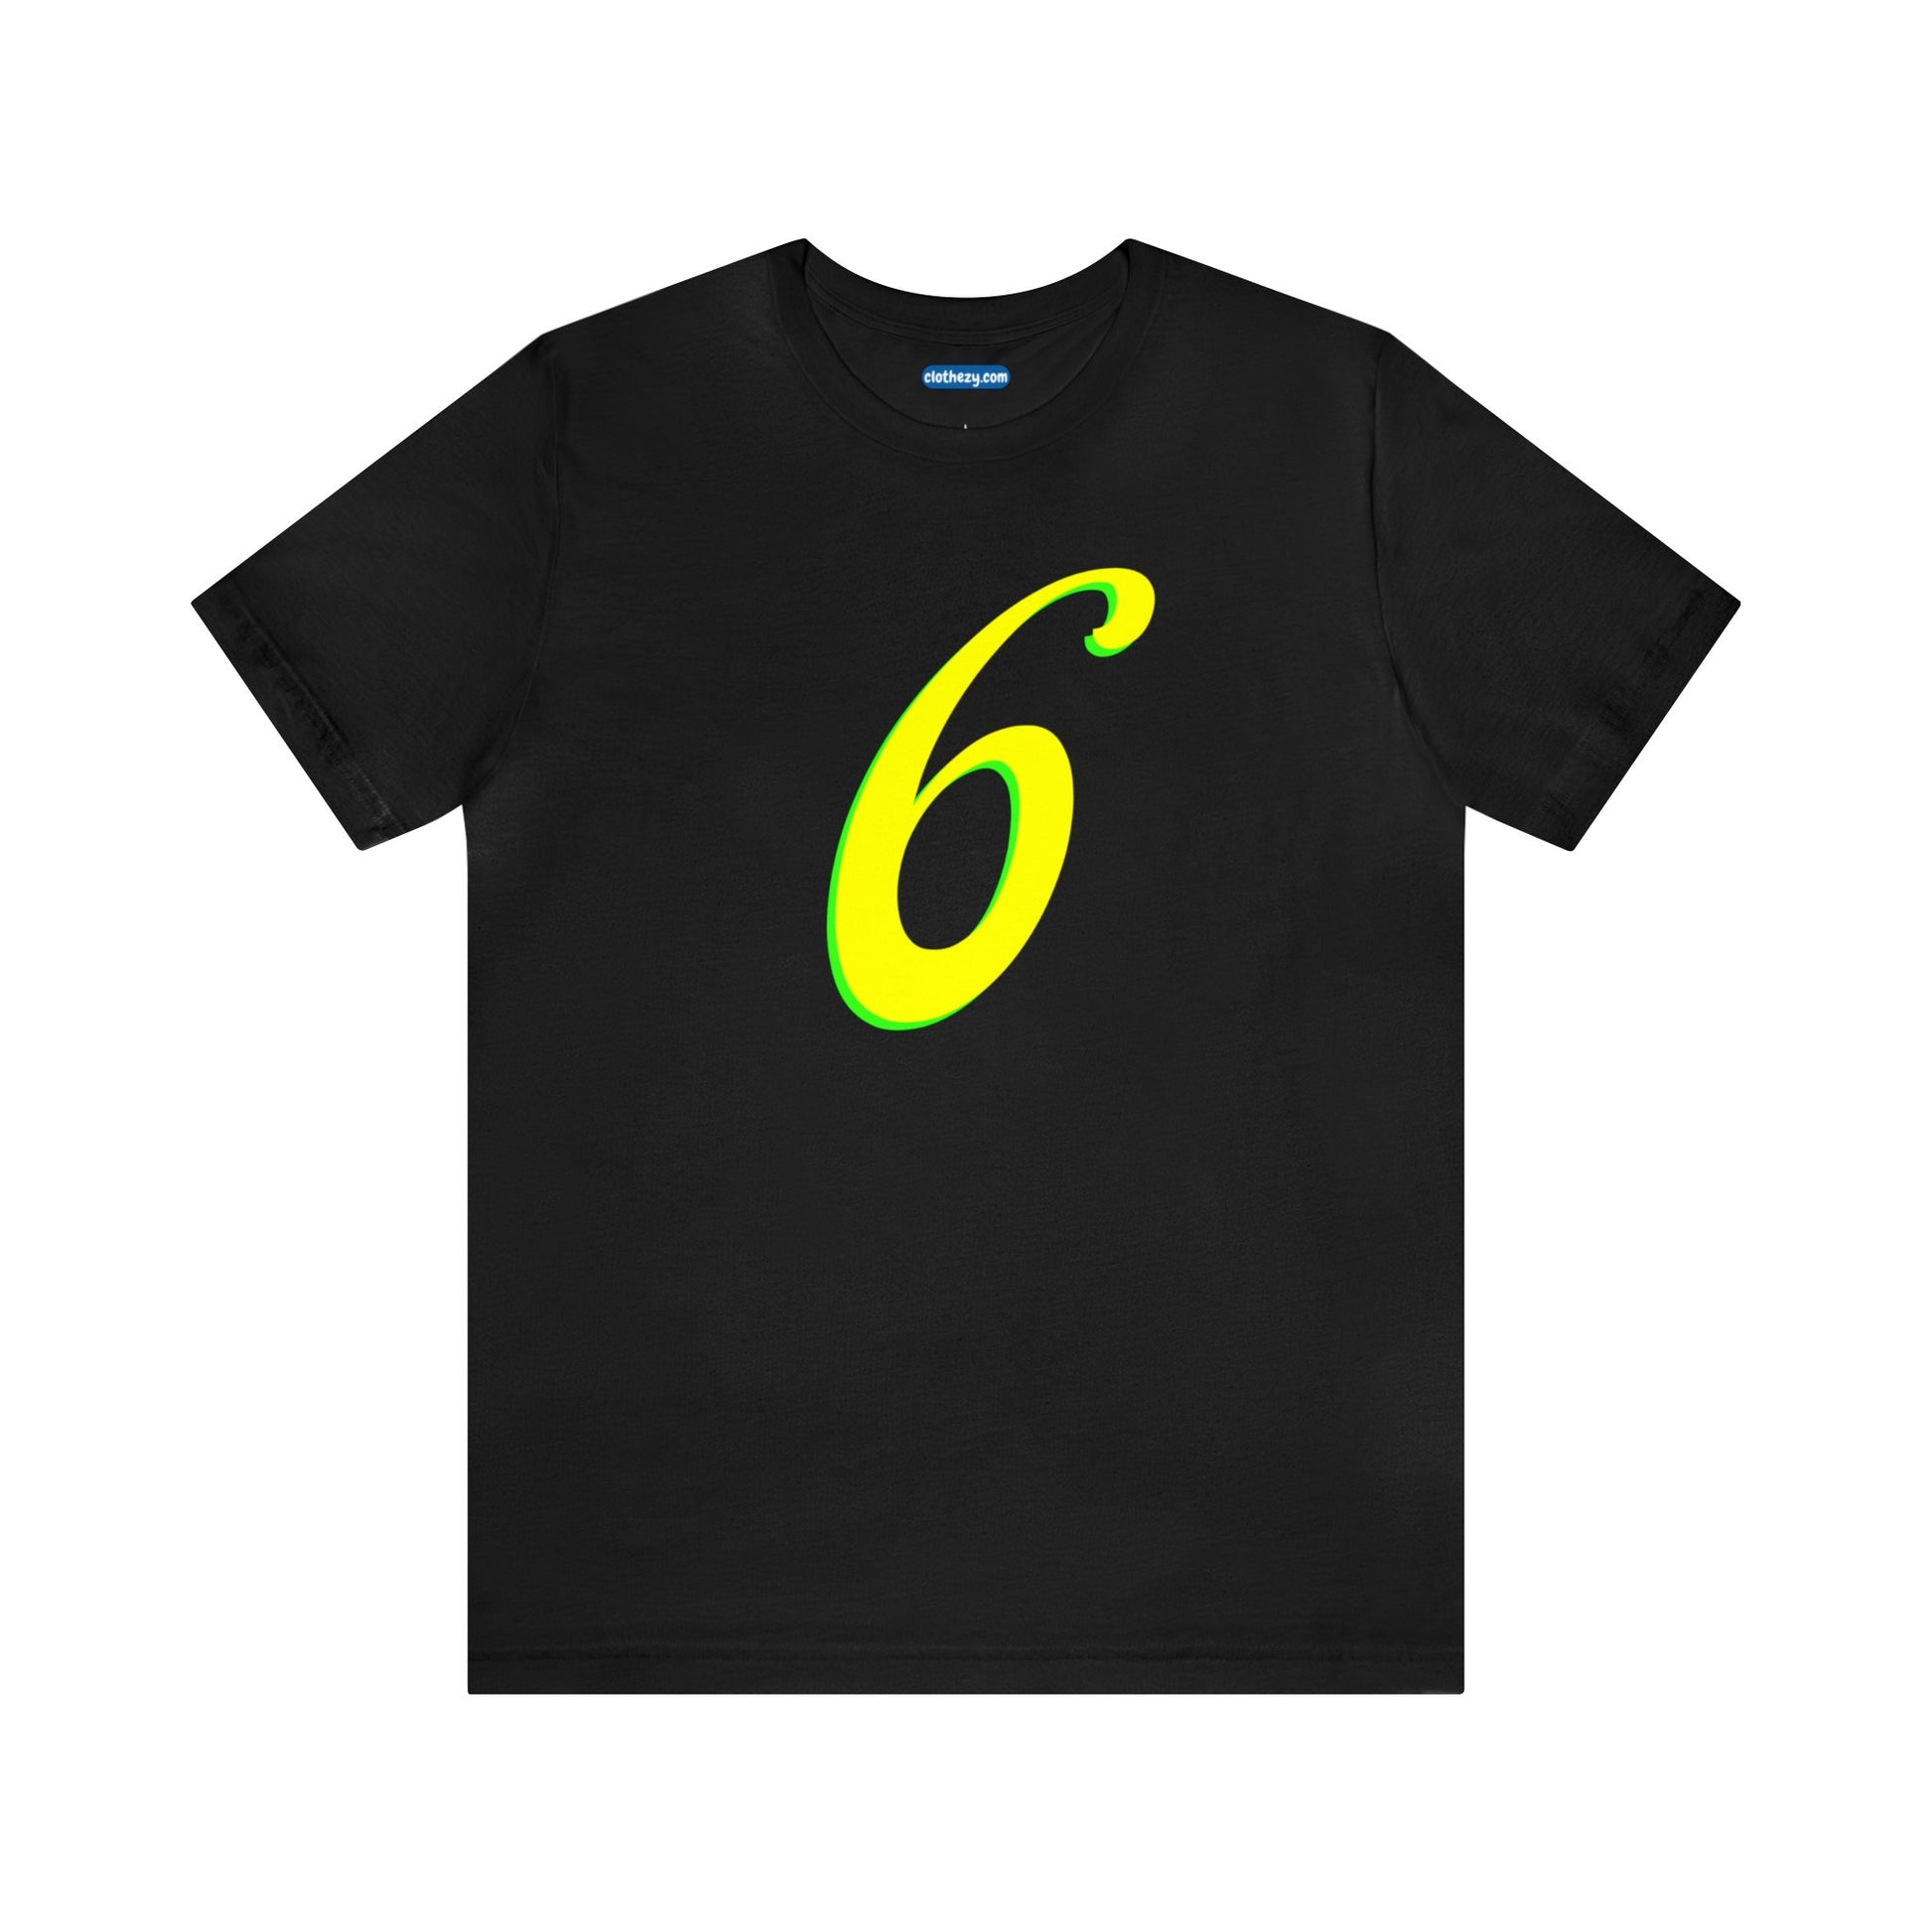 Number 6 Design - Soft Cotton Tee for birthdays and celebrations, Gift for friends and family, Multiple Options by clothezy.com in Dark Grey Heather Size Small - Buy Now